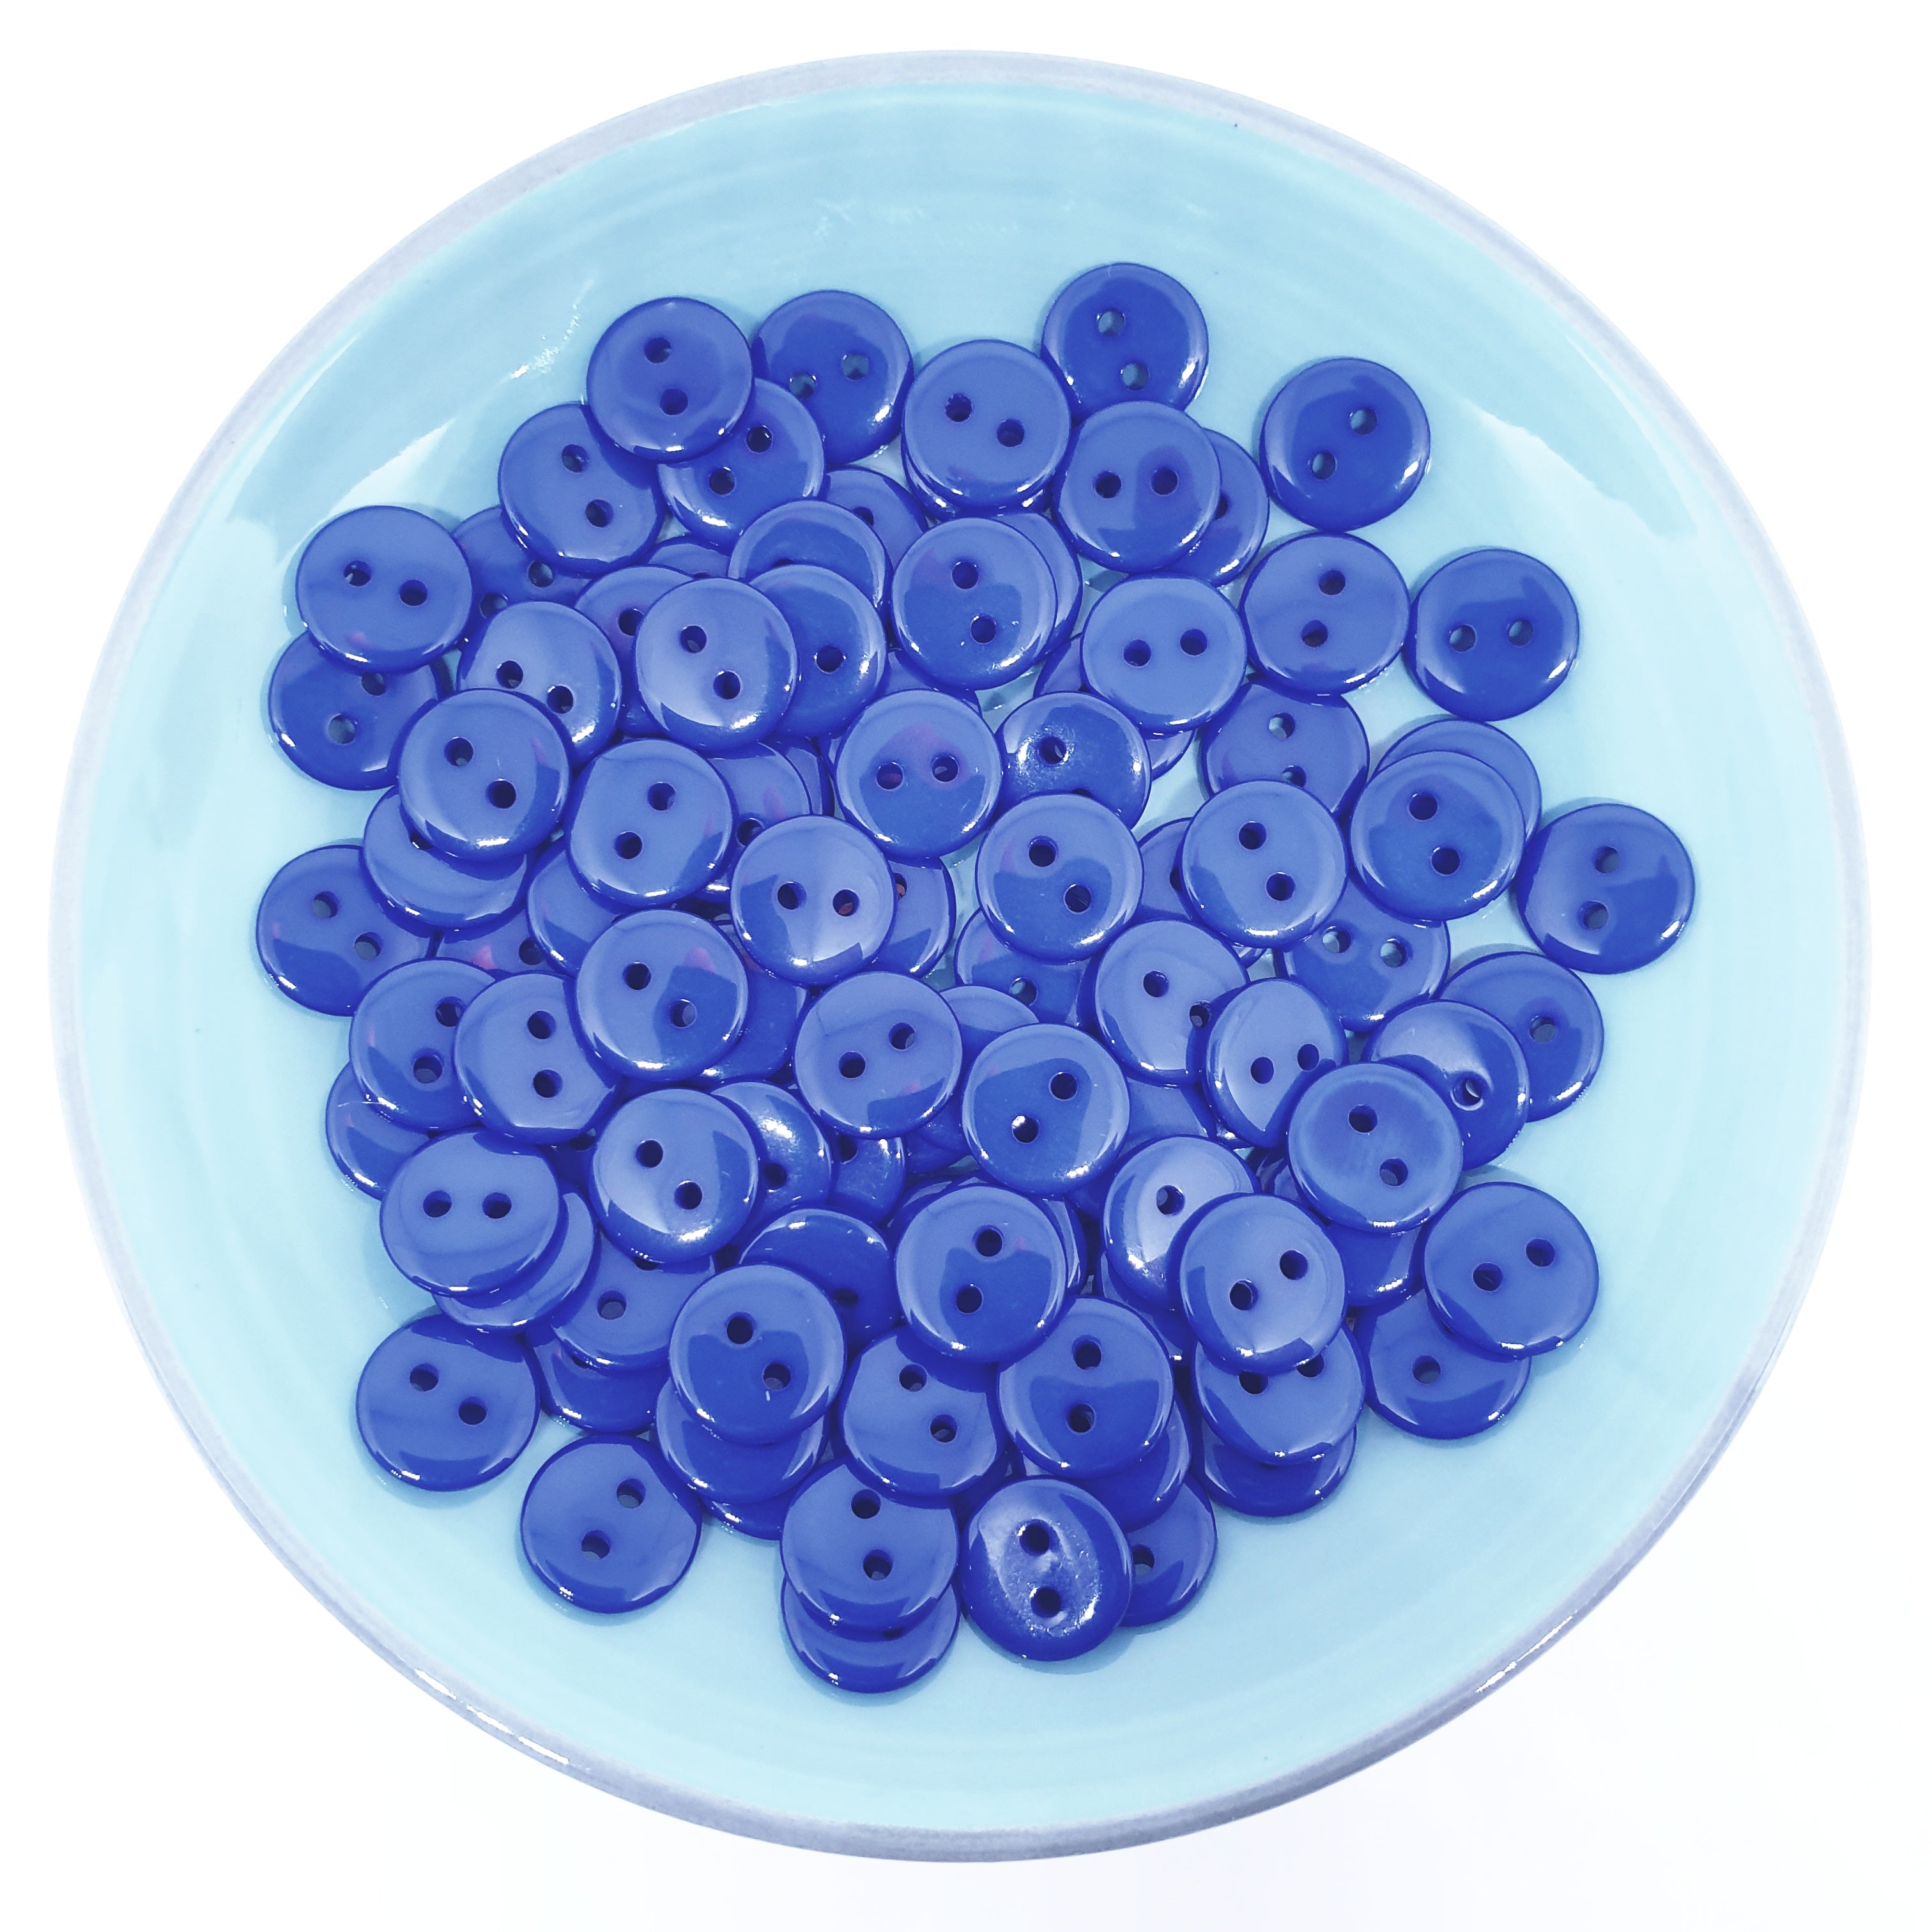 MajorCrafts 120pcs 10mm Dark Blue 2 Holes Small Round Resin Sewing Buttons B22